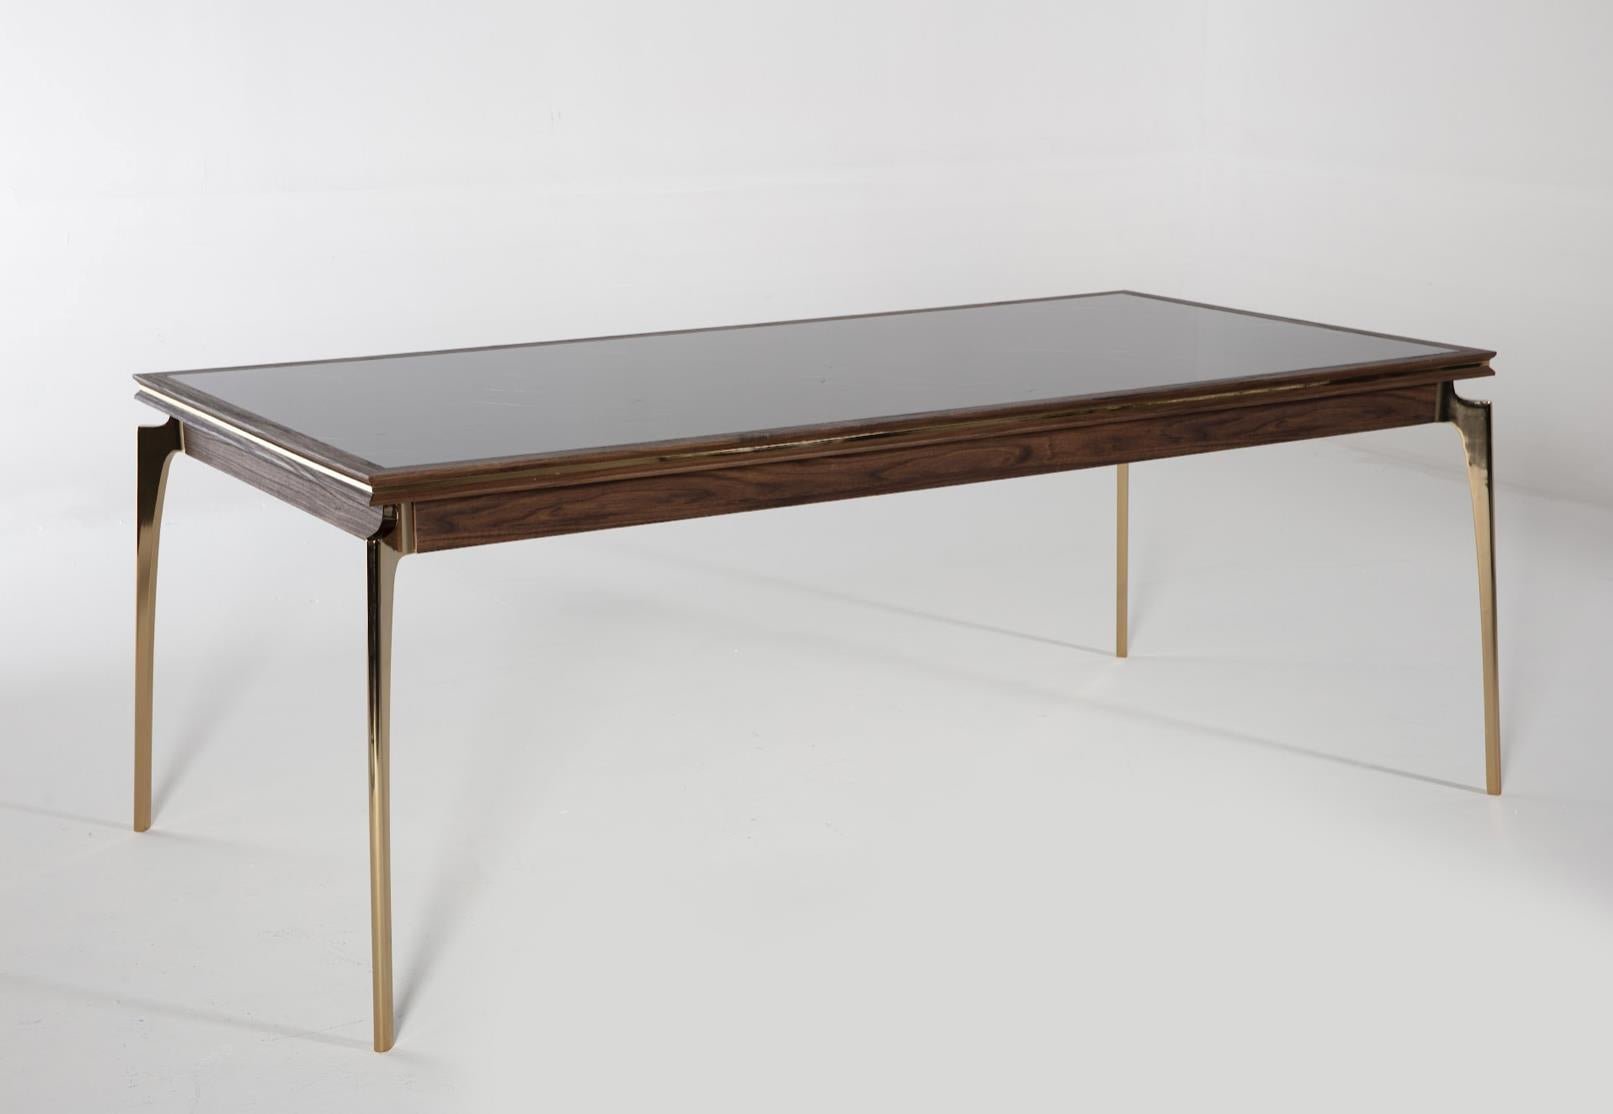 Montego Dining Table by Bellona